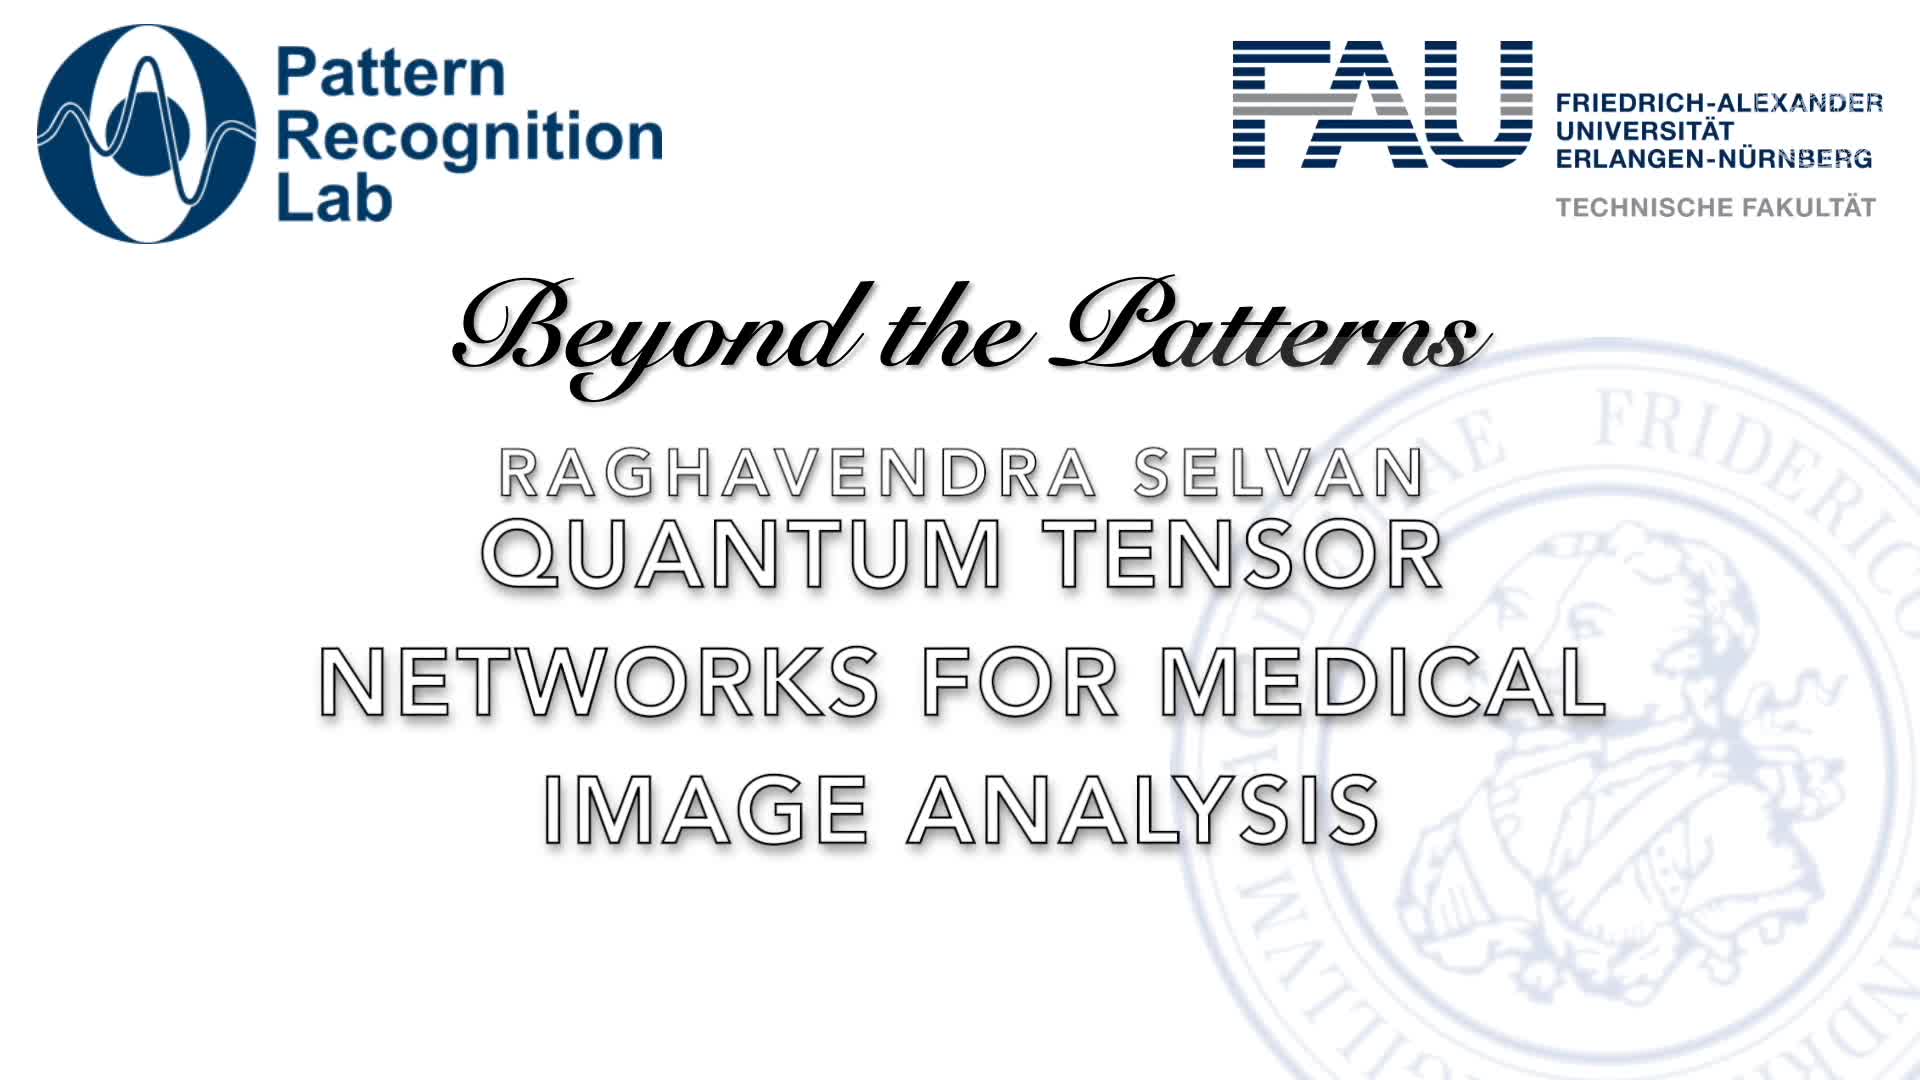 Beyond the Patterns - Raghavendra Selvan: Quantum Tensor Networks for Medical Image Analysis preview image